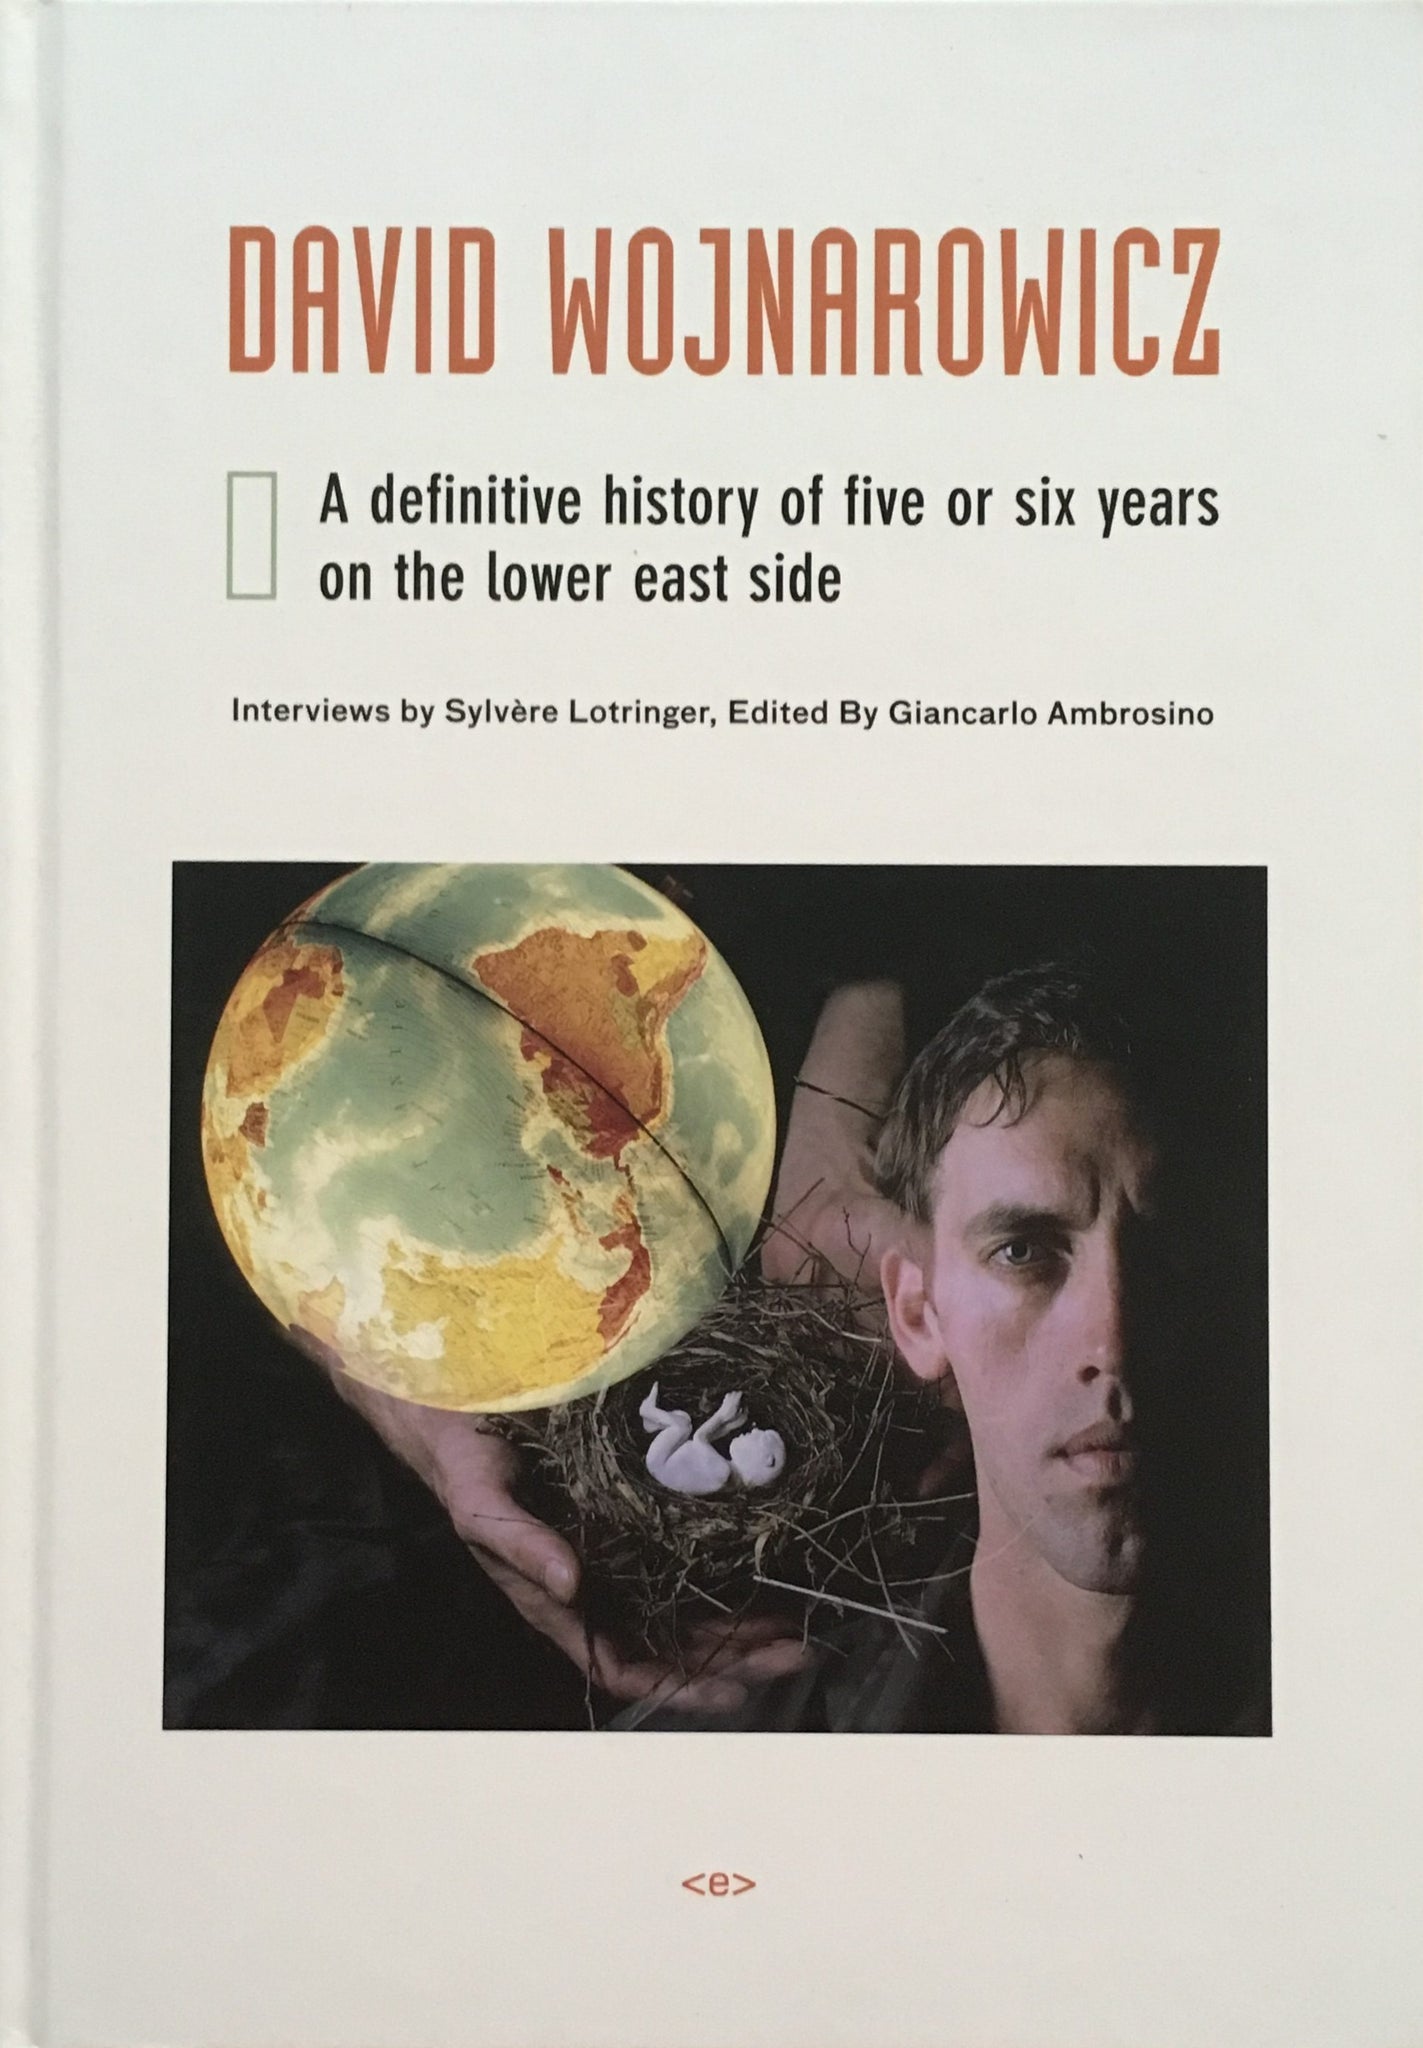 David Wojnarowicz: A definitive history of five or six years on the lower east side - Book at Kavi Gupta Editions